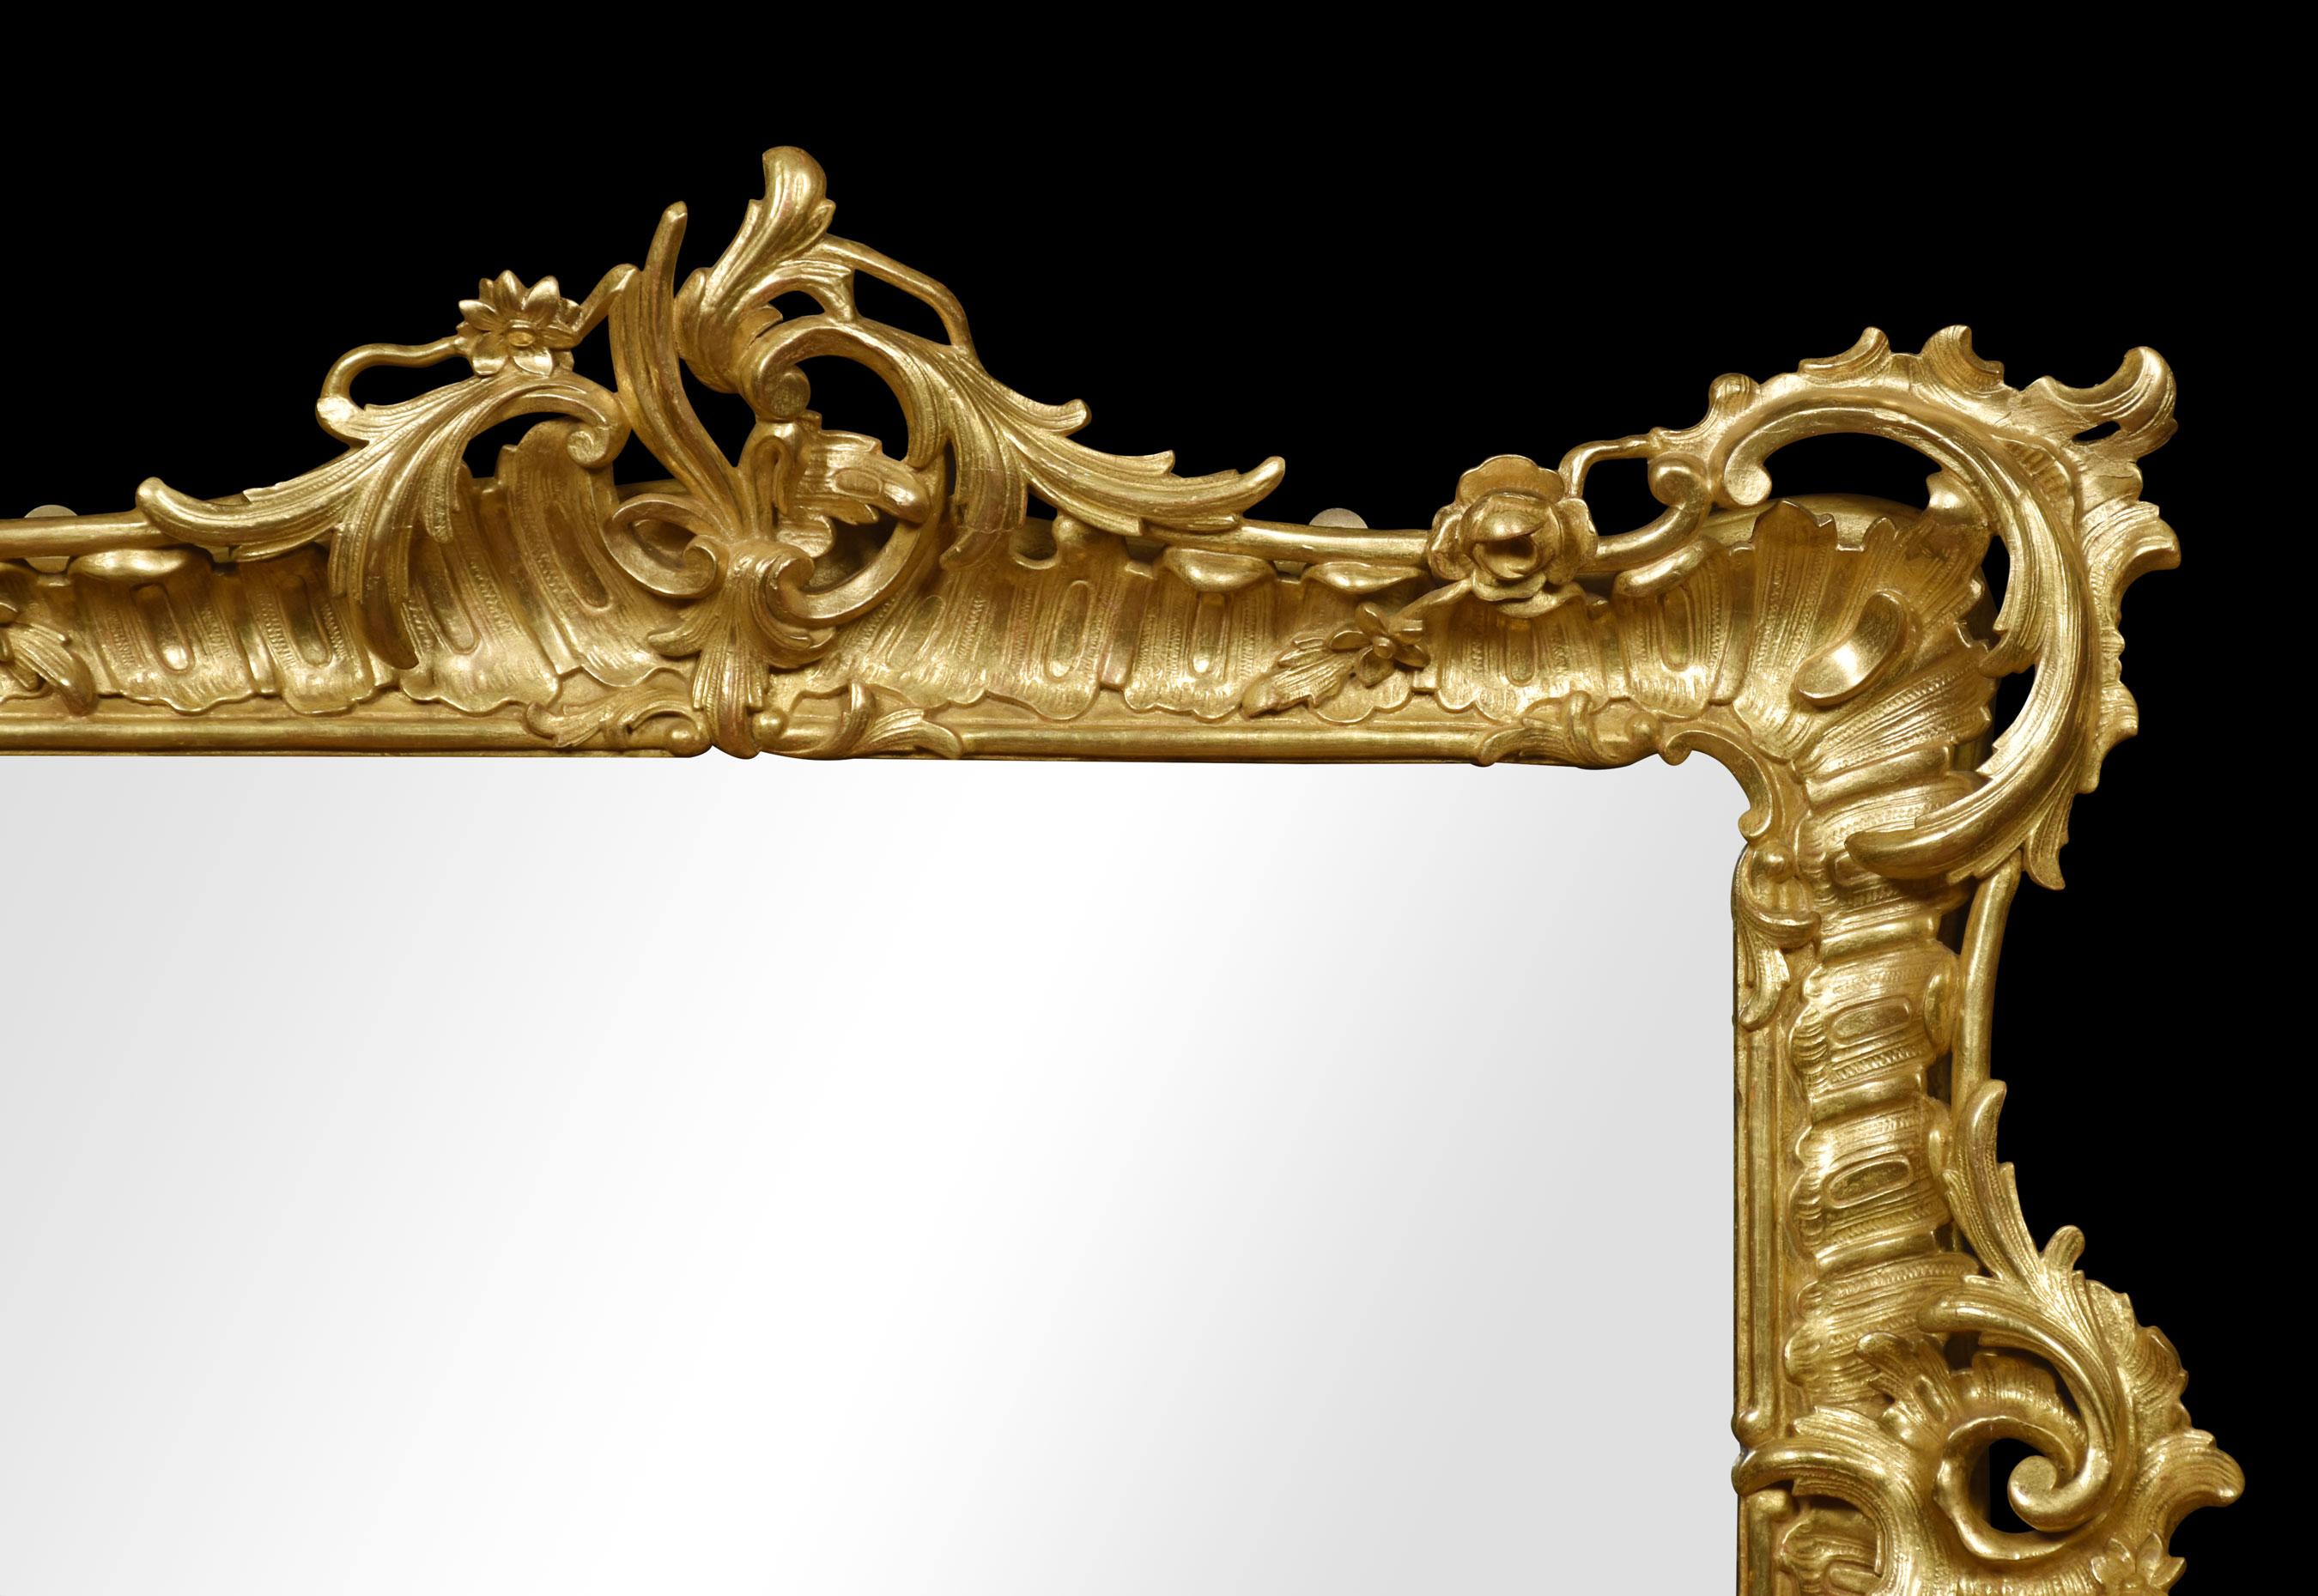 Giltwood Large 19th Century Gilt-Wood Wall Mirror For Sale